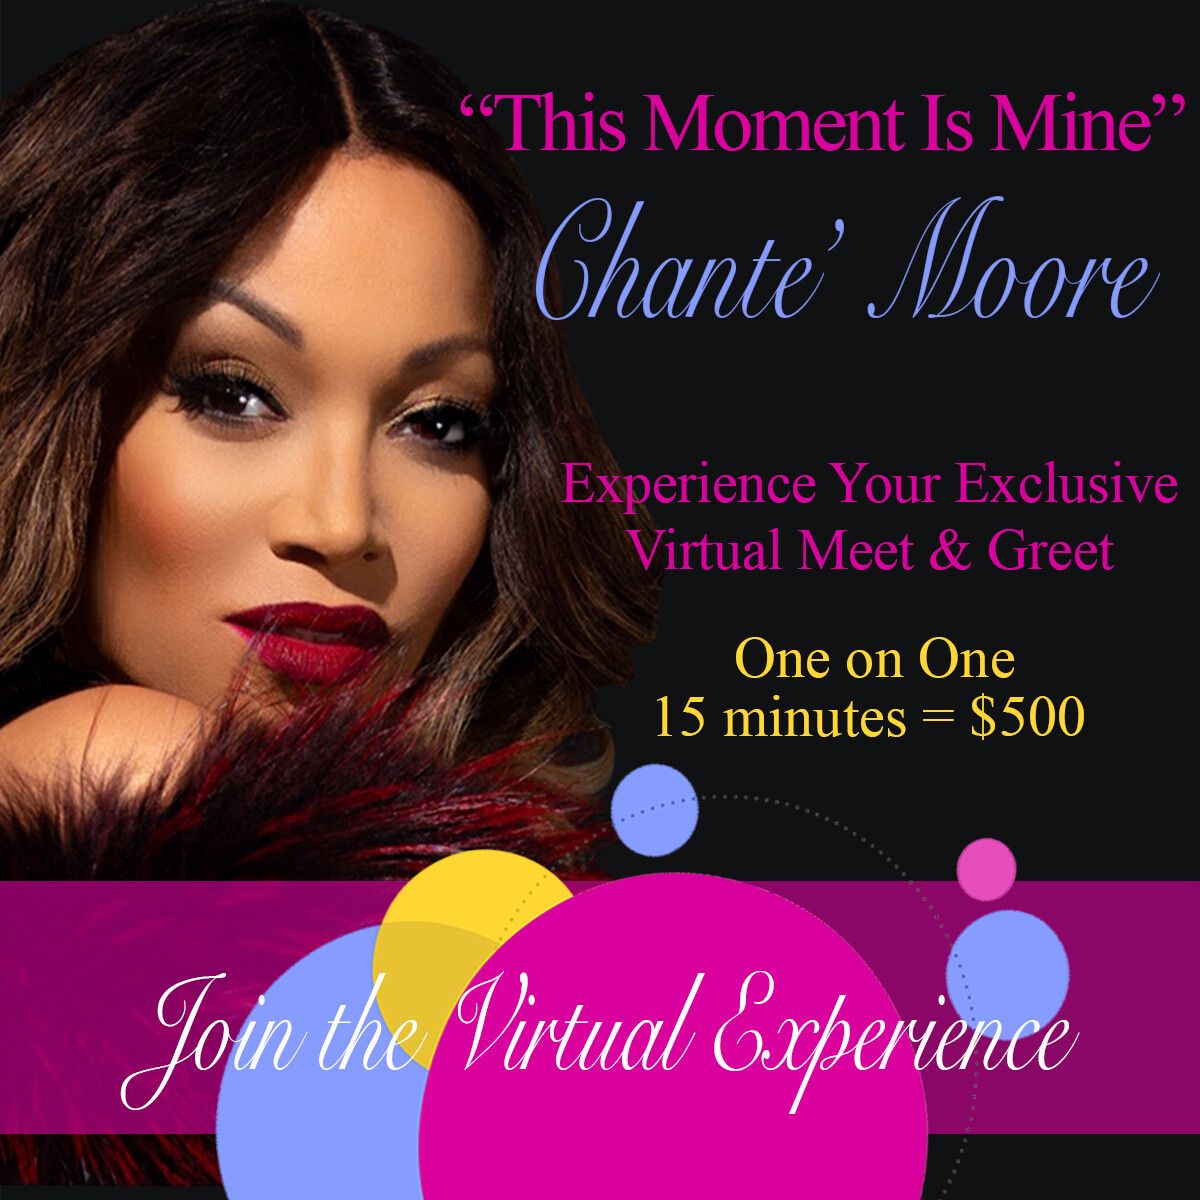 "This Moment Is Mine" Meet & Greet Chante' Moore